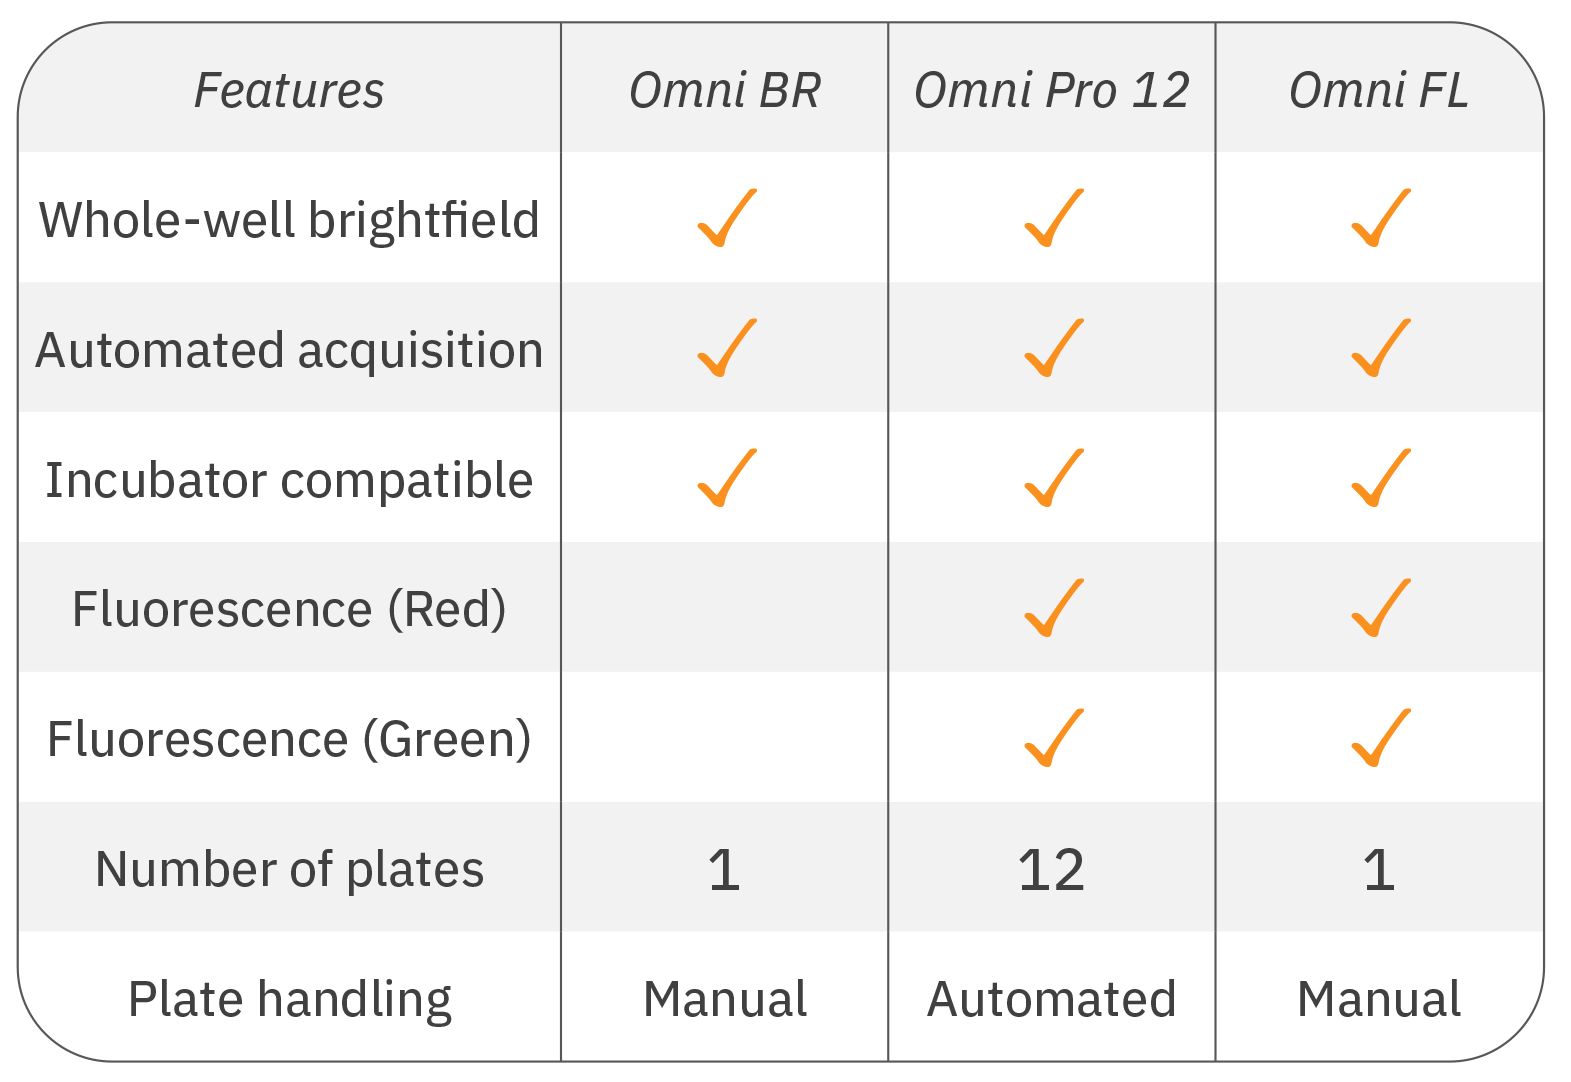 Omni Imaging systems comparisons